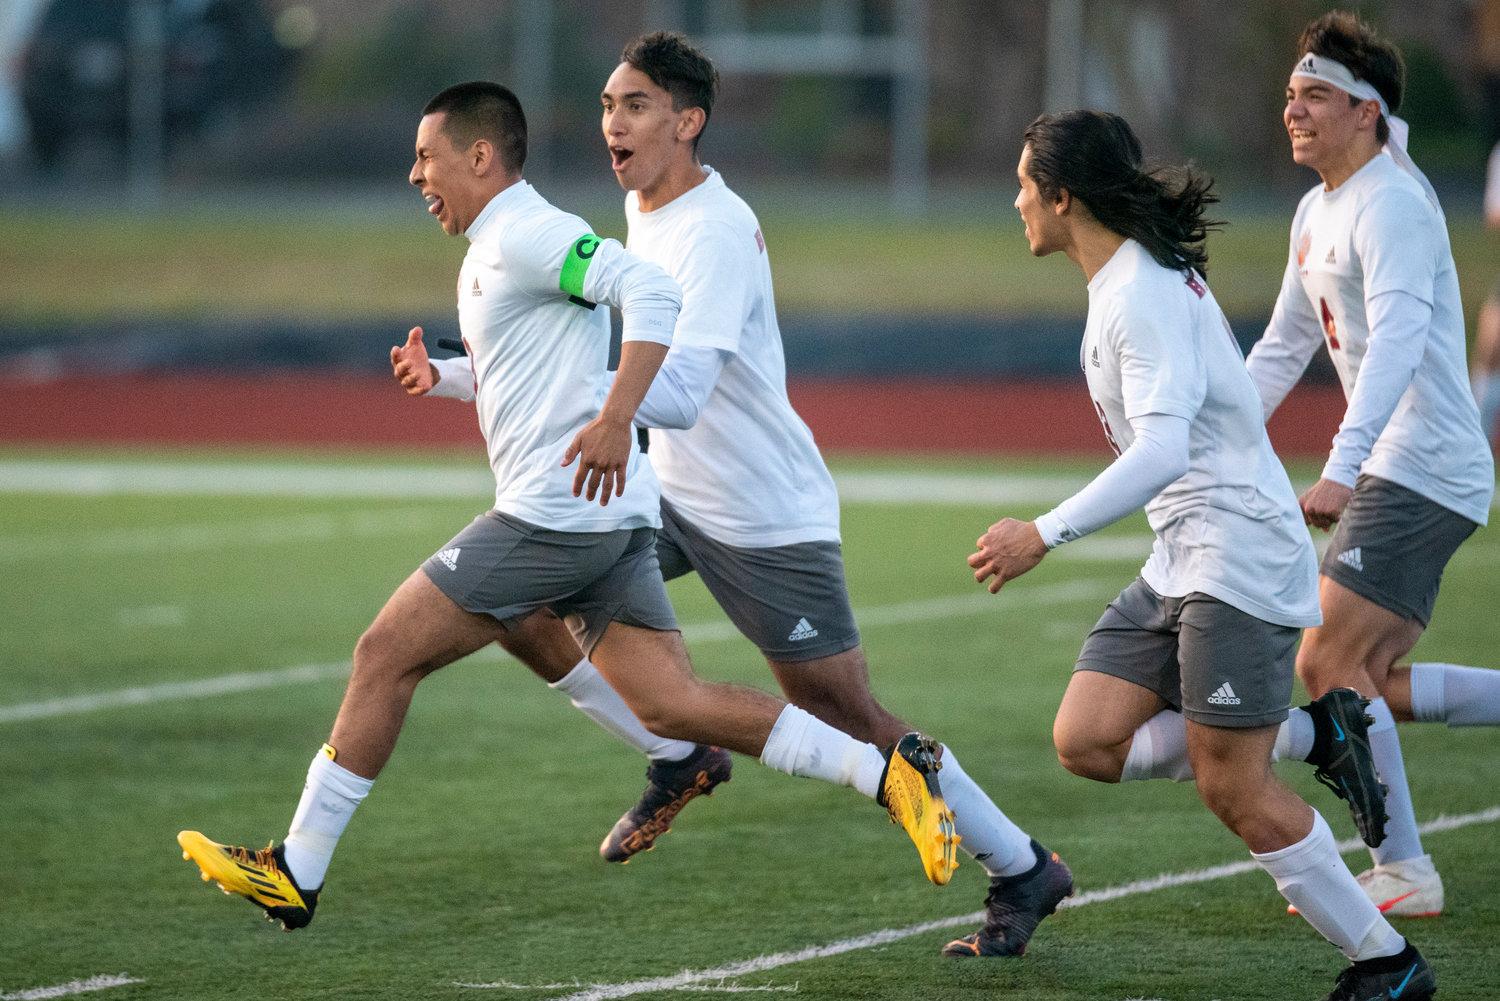 W.F. West's Elvis Leal Perez, left, runs in celebration after scoring a goal in the 27th minute against Centralia on April 22.